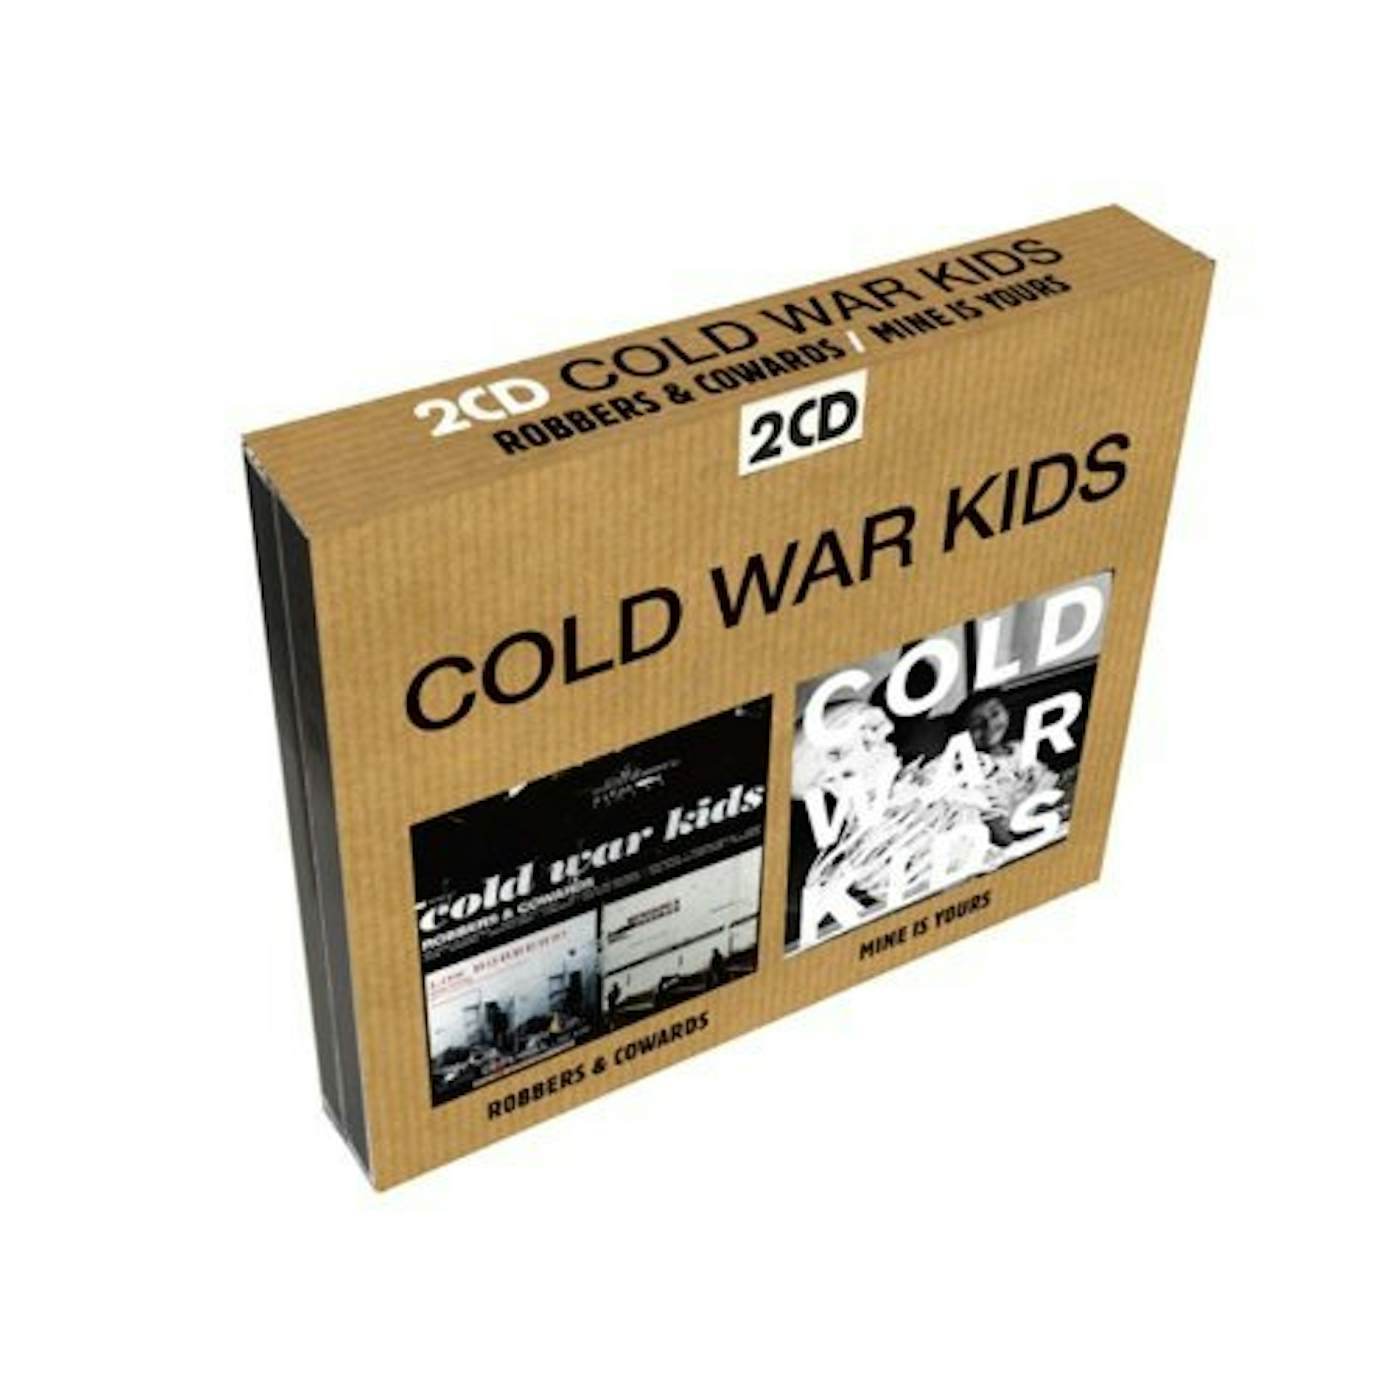 Cold War Kids ROBBERS & COWARDS / MINE IS YOURS CD